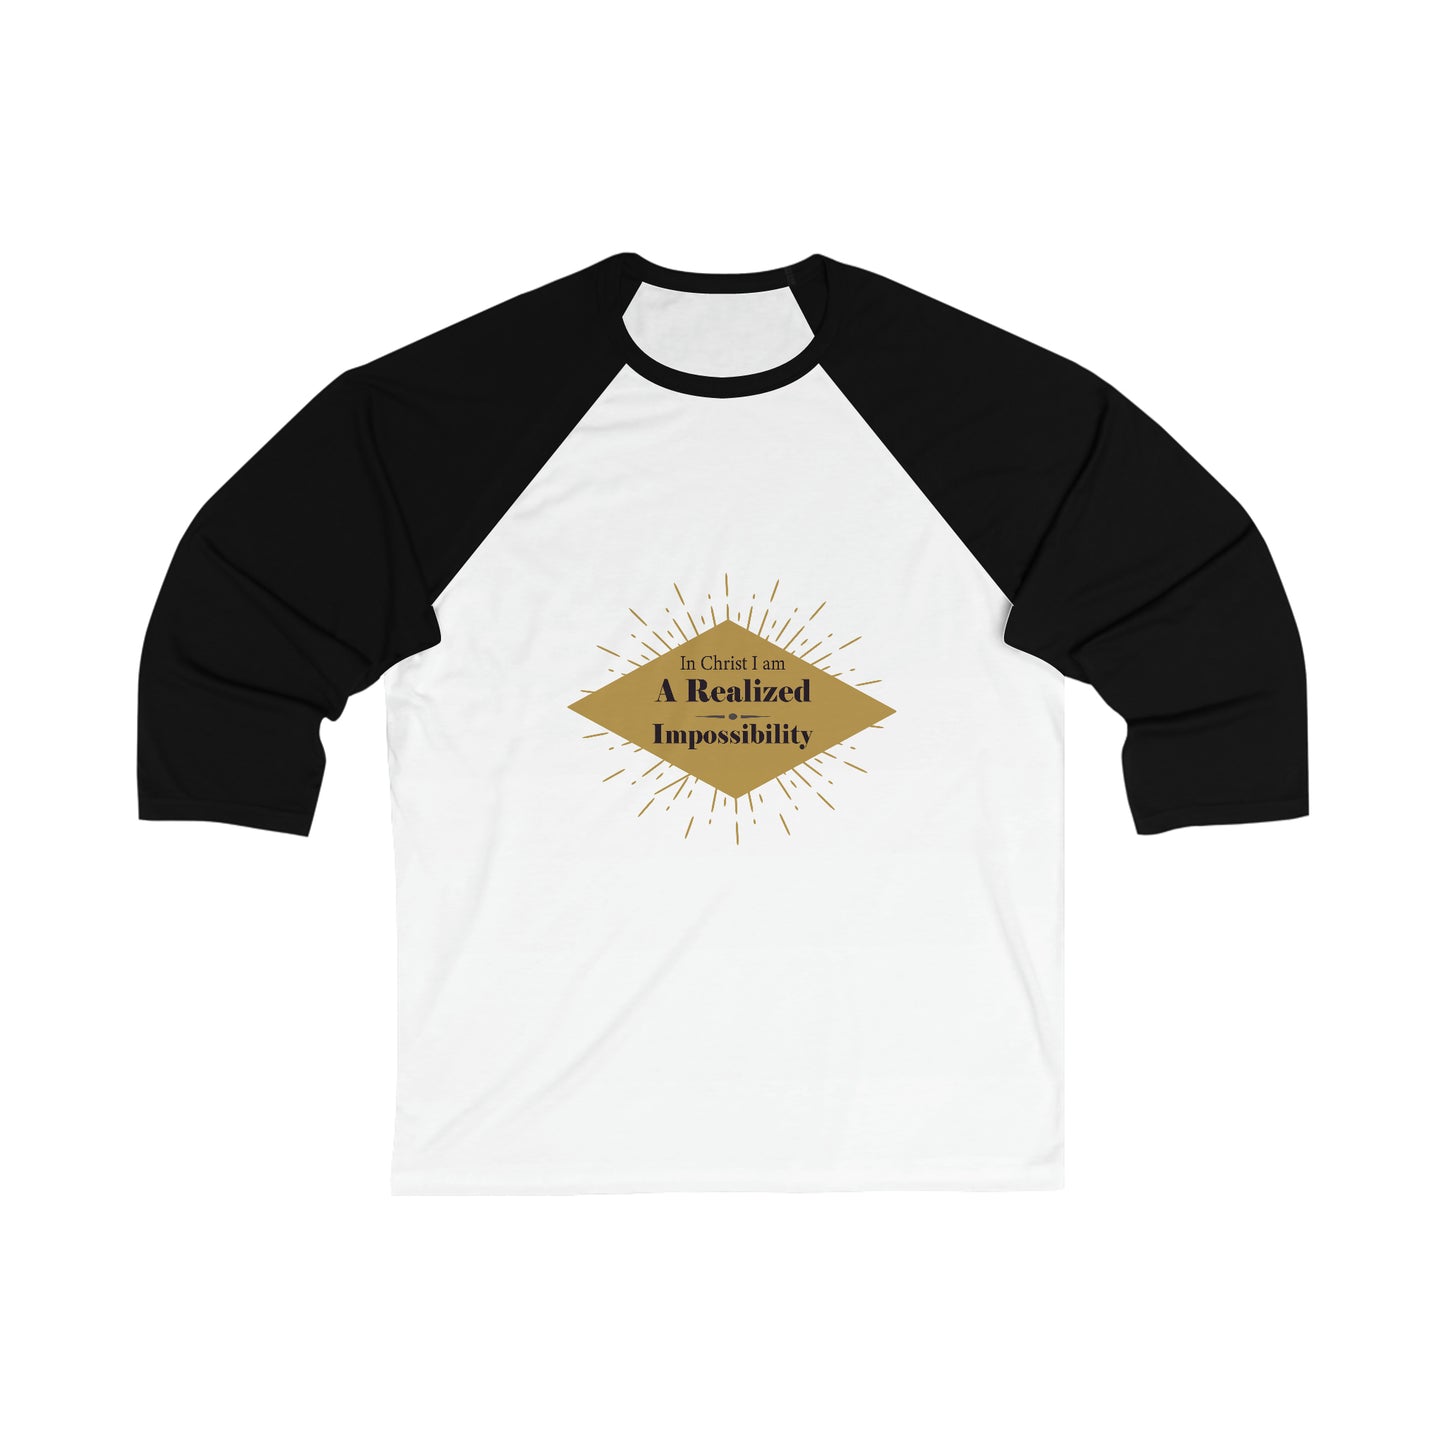 In Christ I Am A Realized Impossibility Unisex 3\4 Sleeve Baseball Tee